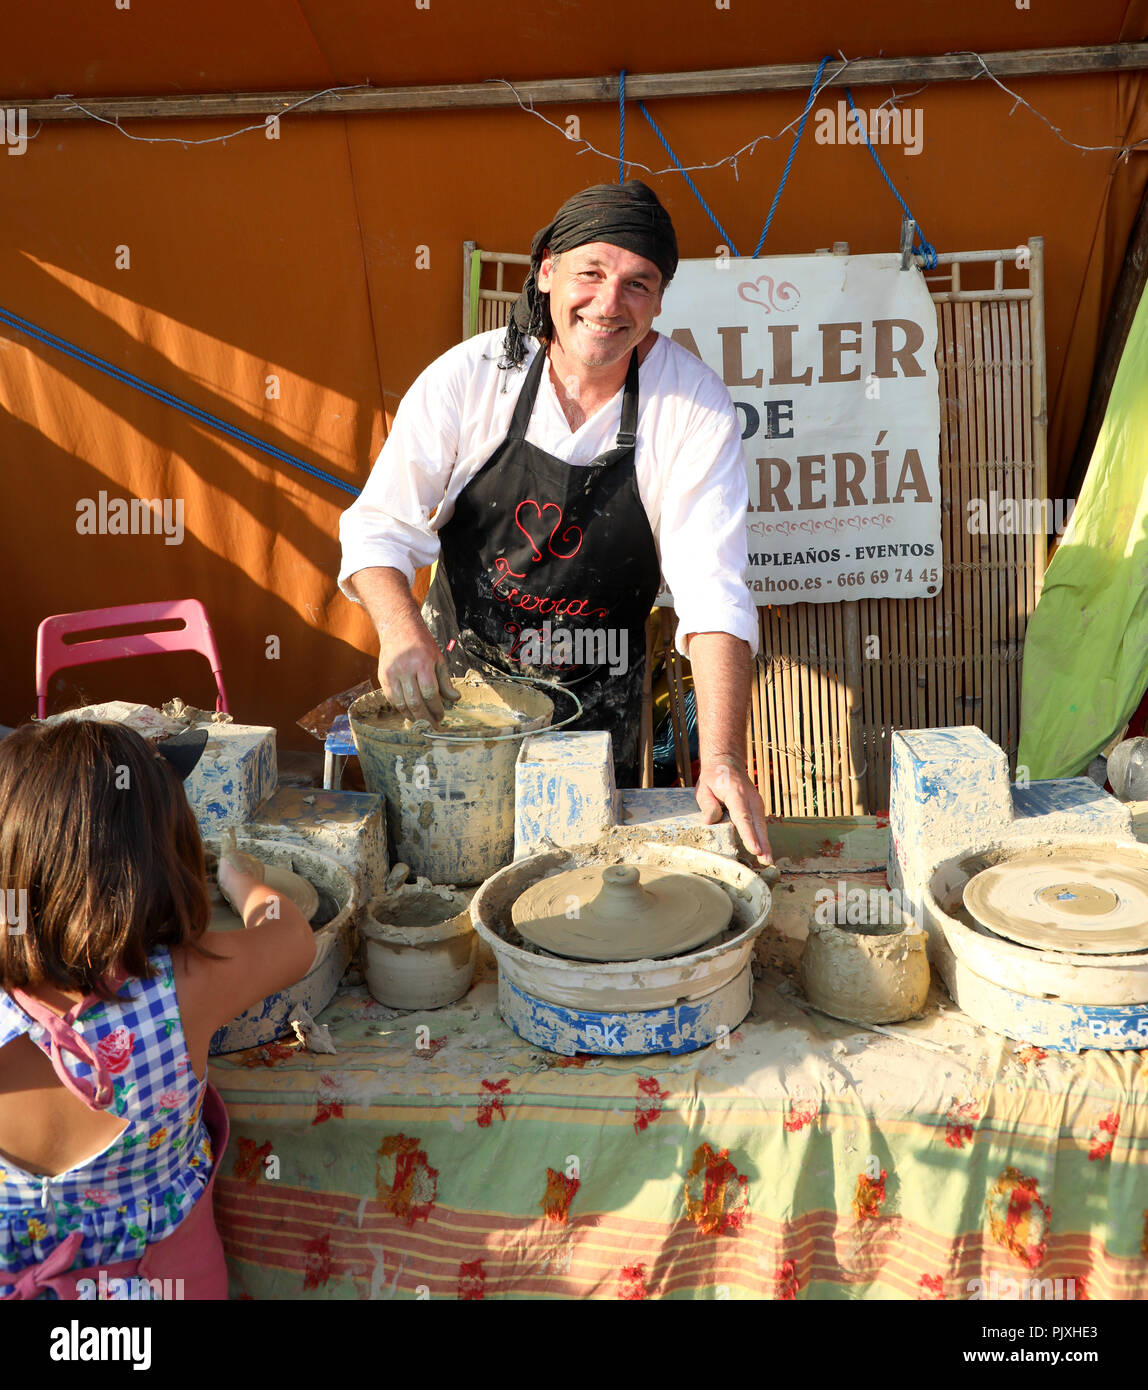 Potter working at a Spanish fiesta Stock Photo